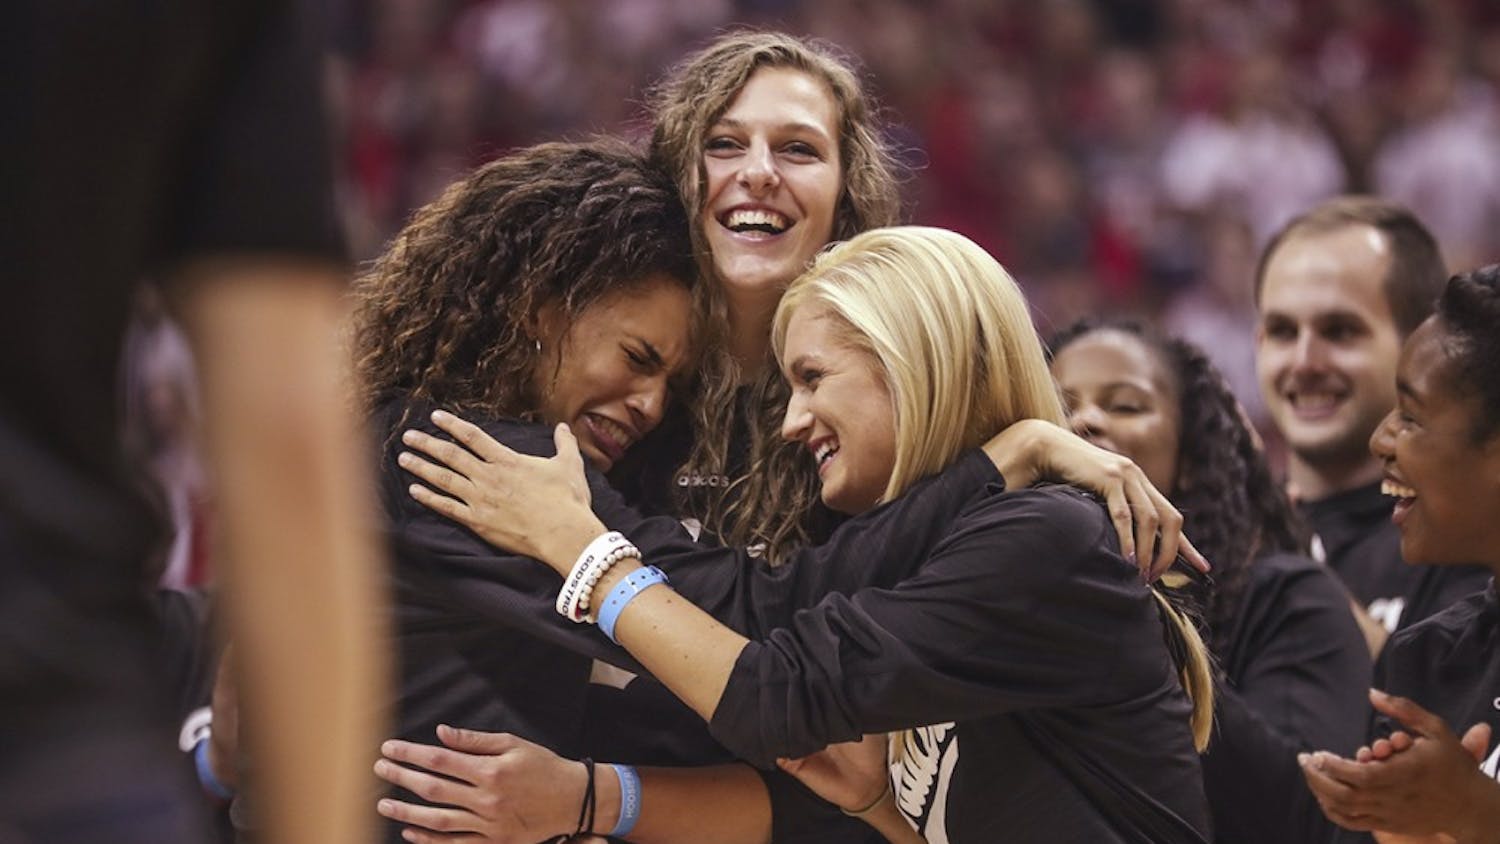 Sophomore forward Bre Wickware (left), senior forward Amanda Cahill (middle) and senior guard Tyra Buss (right) hug while Coach Teri Moren talks to the crowd during Hoosier Hysteria on Oct. 21. Buss and Cahill were two of 30 players nominated for the Senior CLASS Award on Jan. 4.